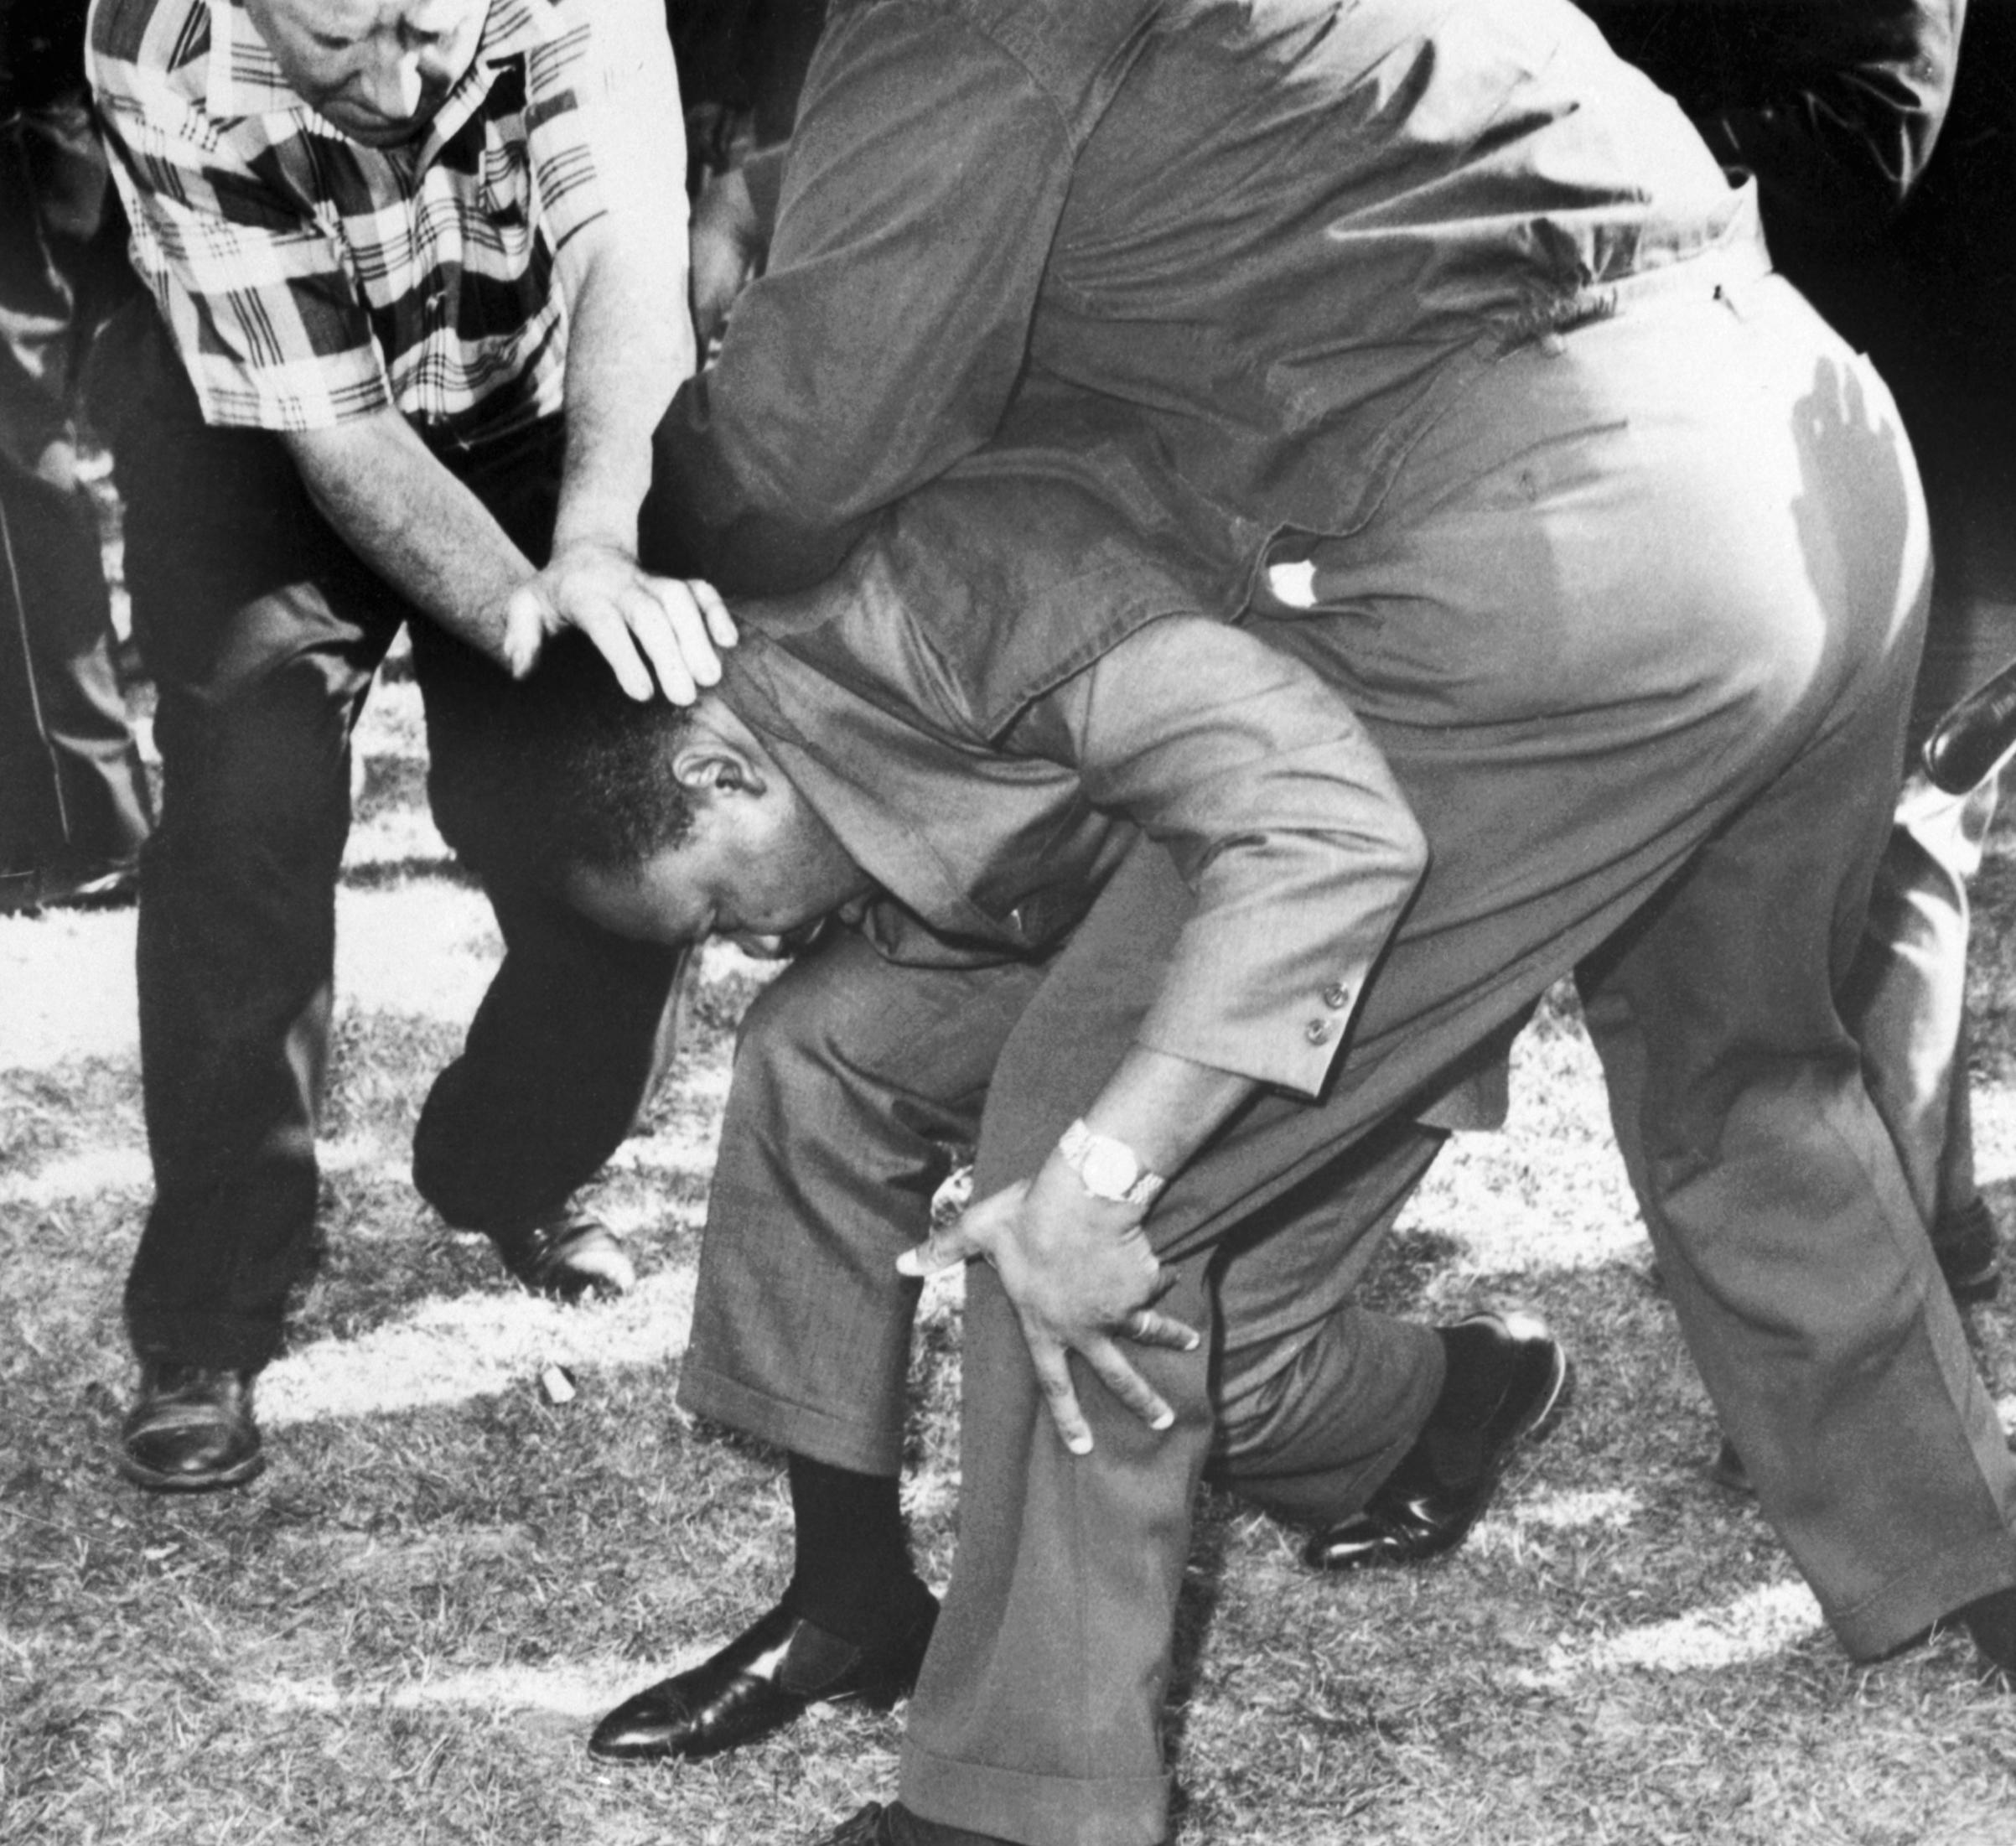 Martin Luther King Jr. was shielded by his aides from a a mob of hostile whites after being struck by a rock to his head, while leading the march with civil rights demonstrators to protest housing discrimination in Chicago, Illinois. August 5, 1966